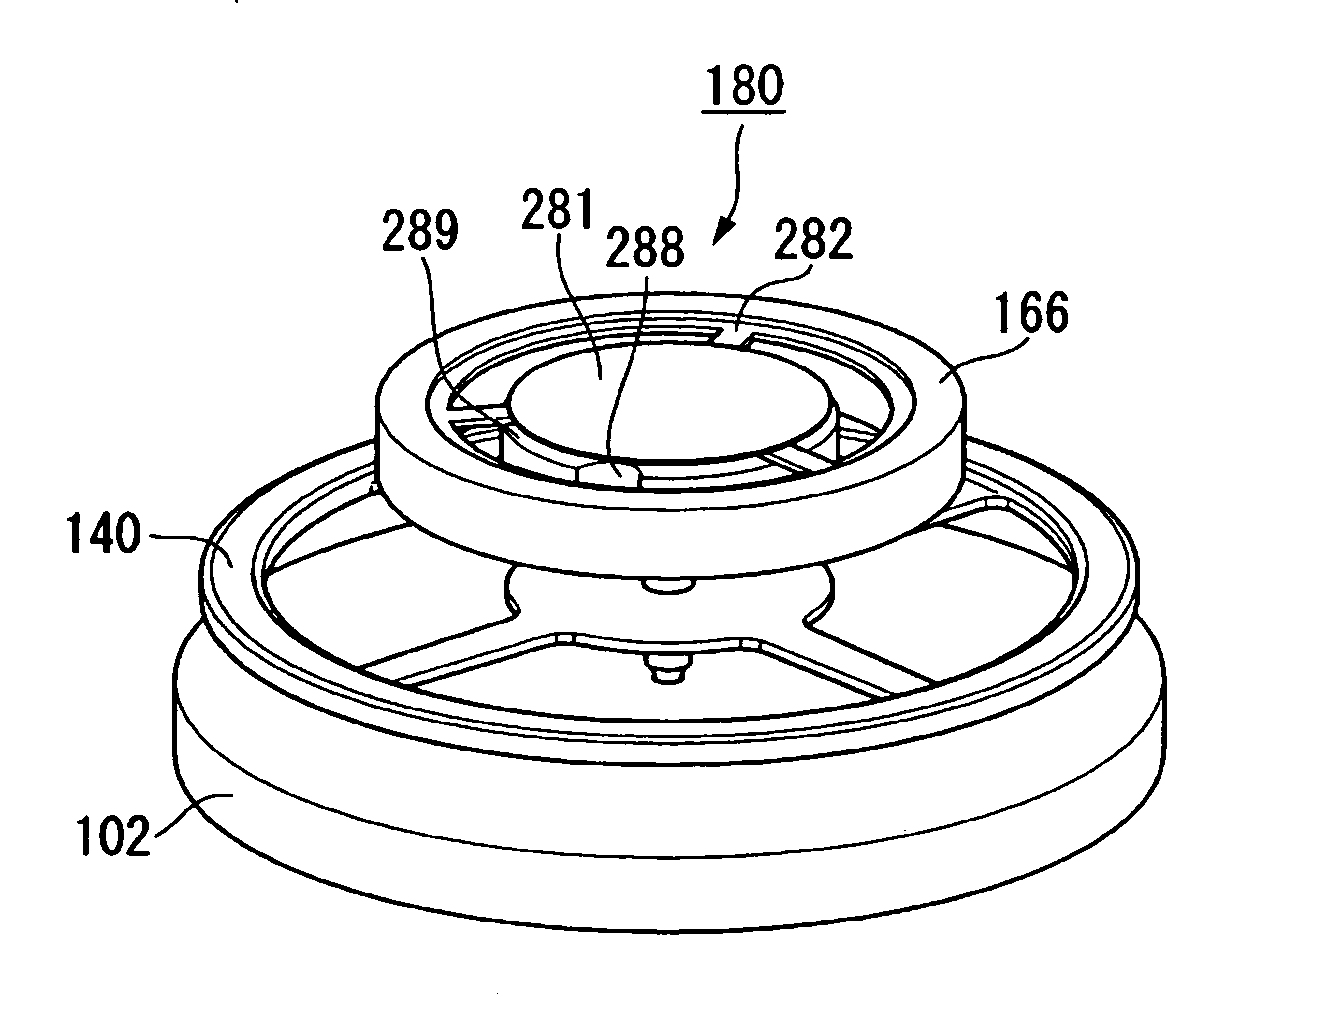 Timepiece bearing, movement, and portable timepiece